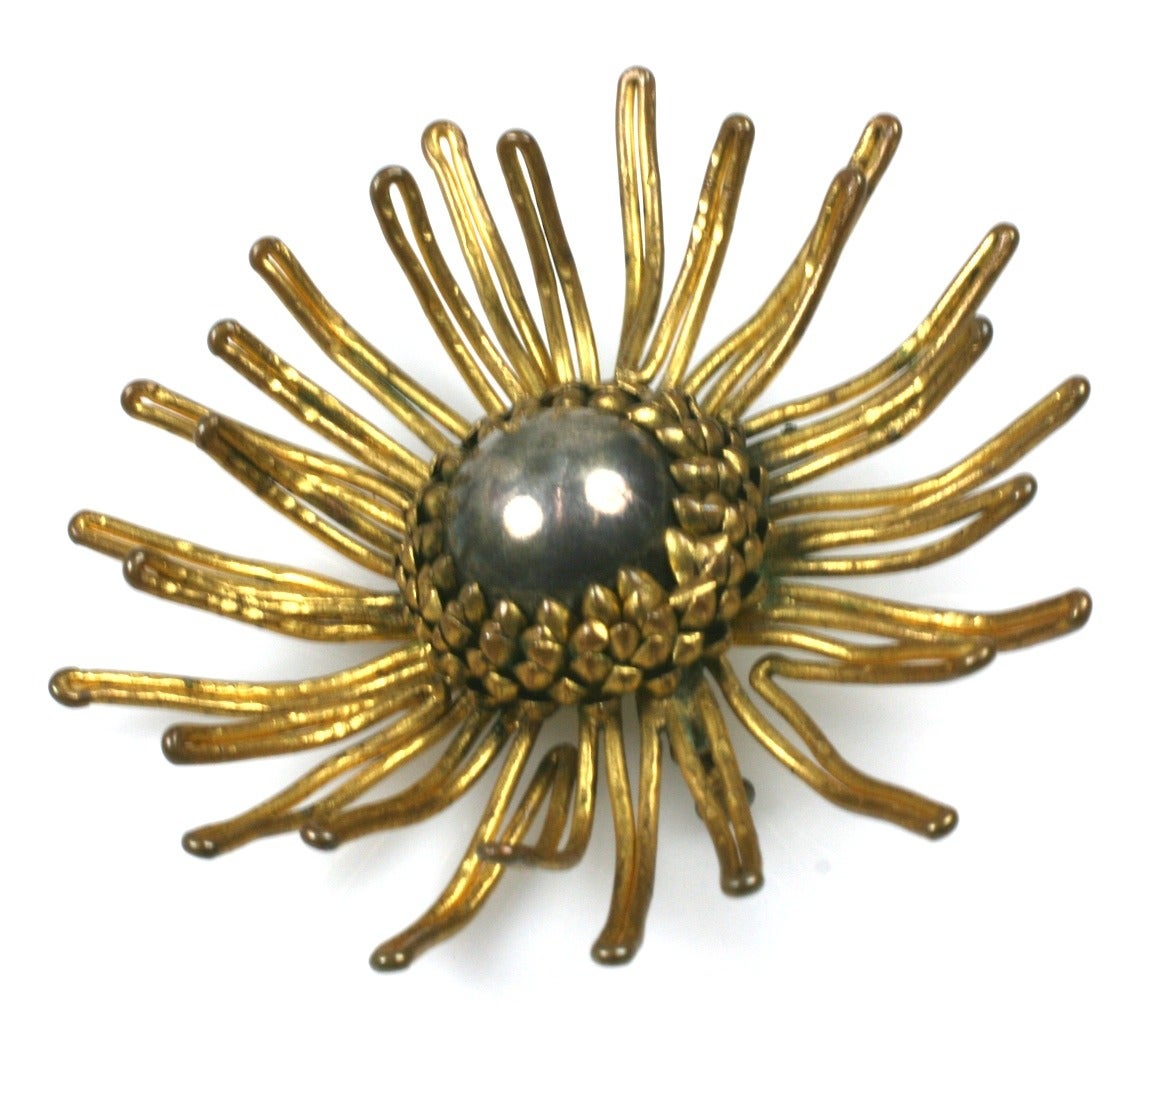 Roger Scemama antique gilt and pewter metal abstract Modernist starburst brooch. Completely hand made in France, 1950's. 2.5